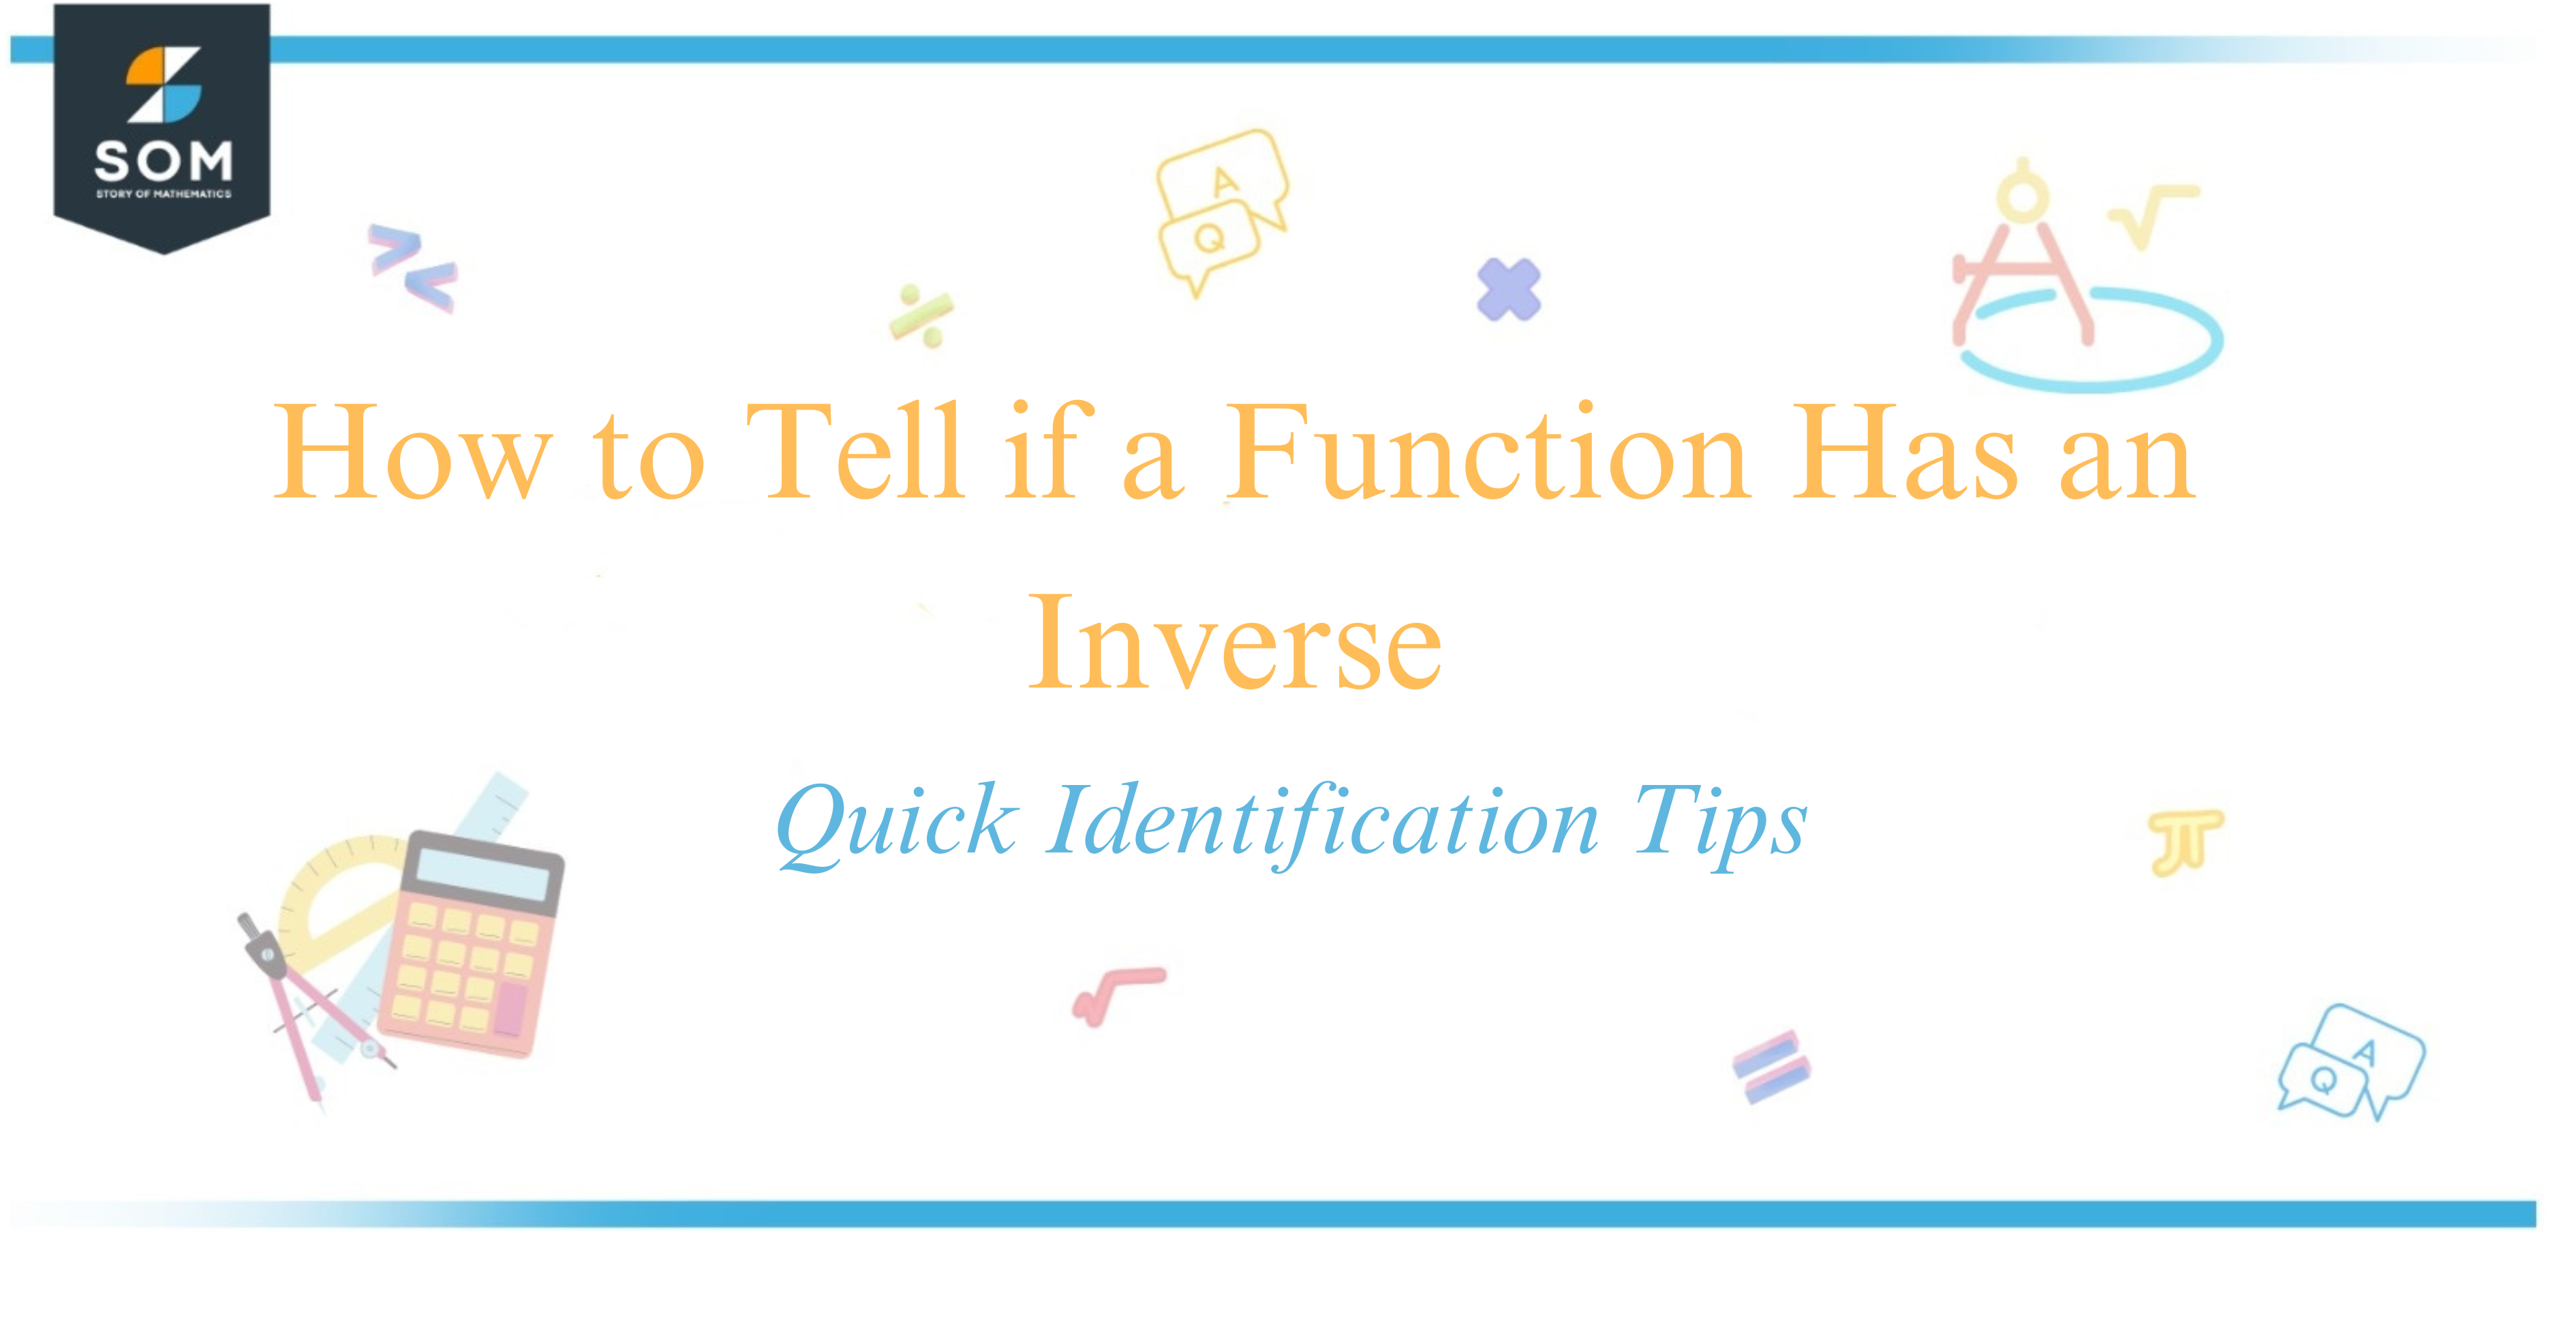 How to Tell if a Function Has an Inverse Quick Identification Tips